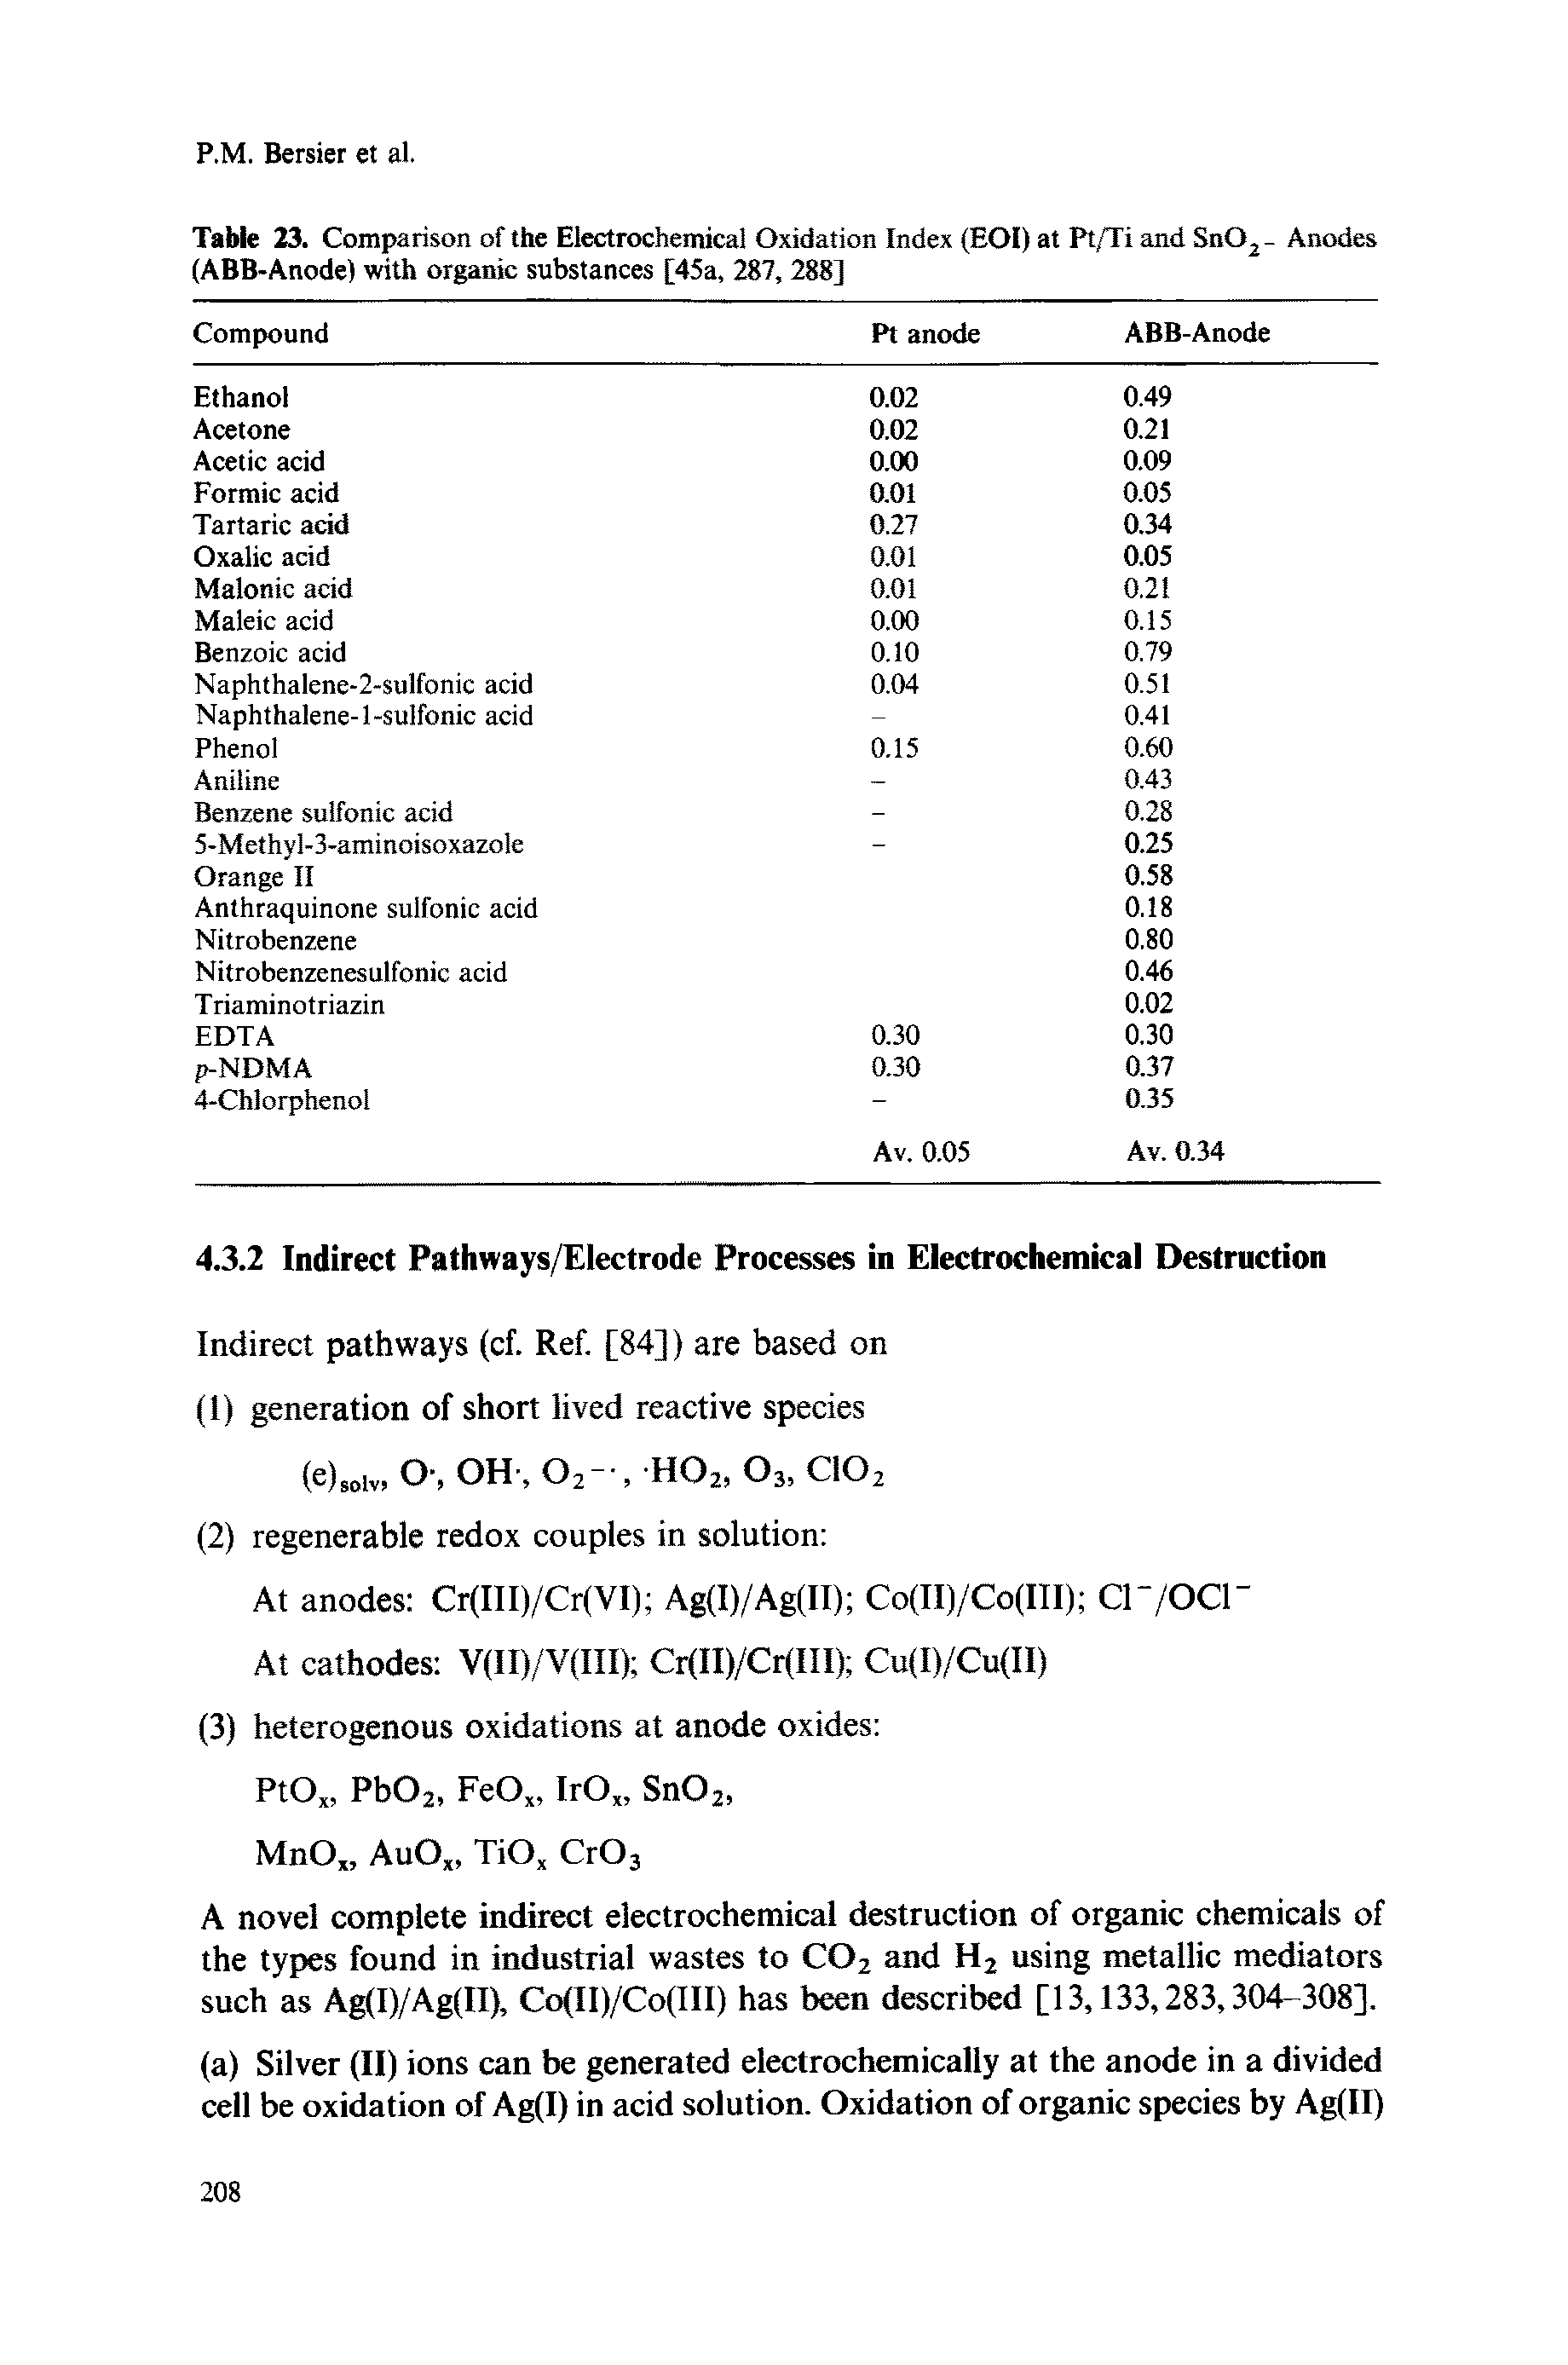 Table 23. Comparison of the Electrochemical Oxidation Index (EOI) at Pt/Ti and Sn02- Anodes (ABB-Anode) with organic substances [45a, 287, 288]...